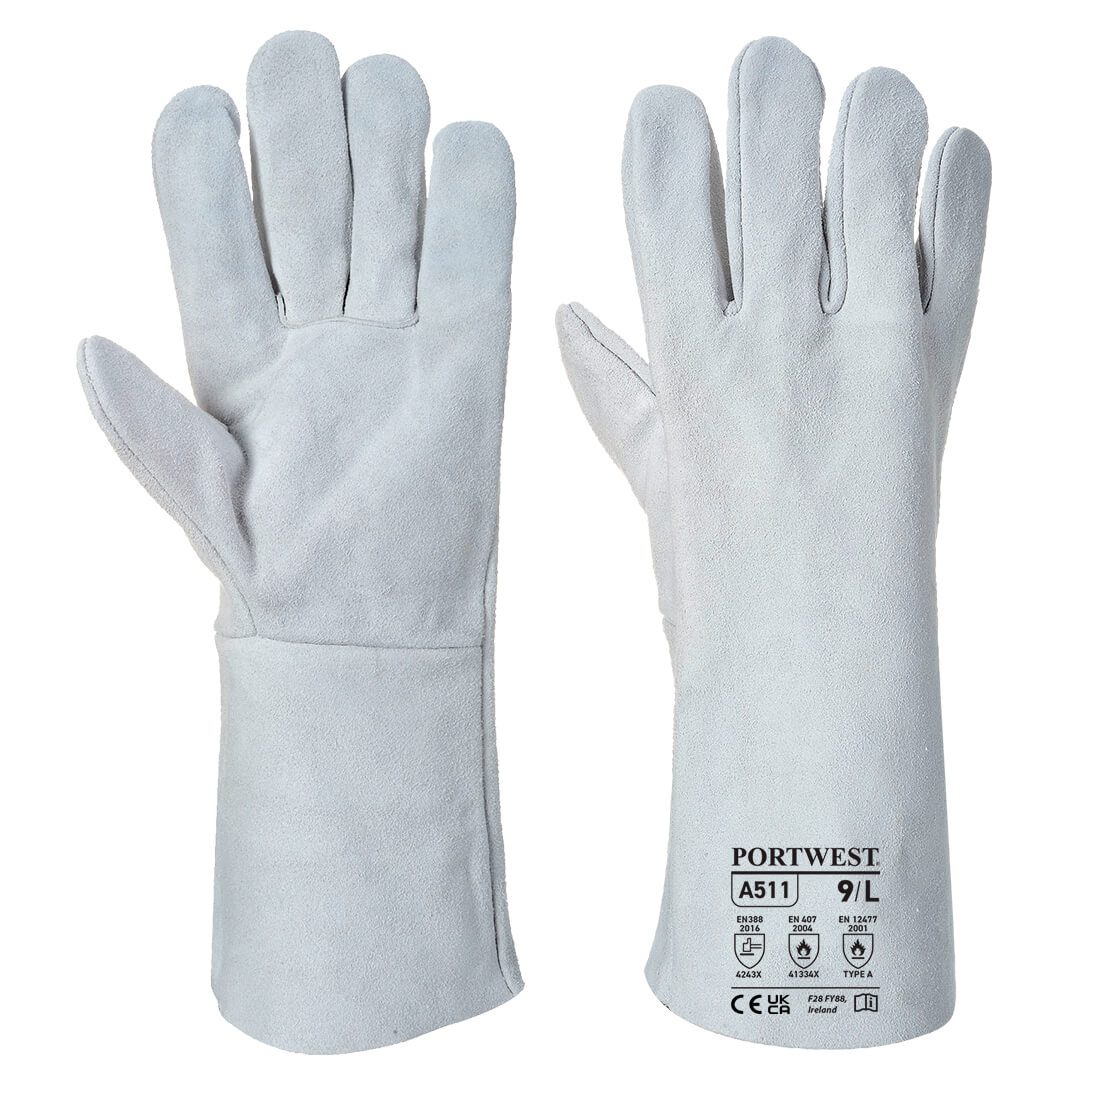 Classic Welding Gauntlet Size XL Grey Re-usable Gloves A511GRRXL